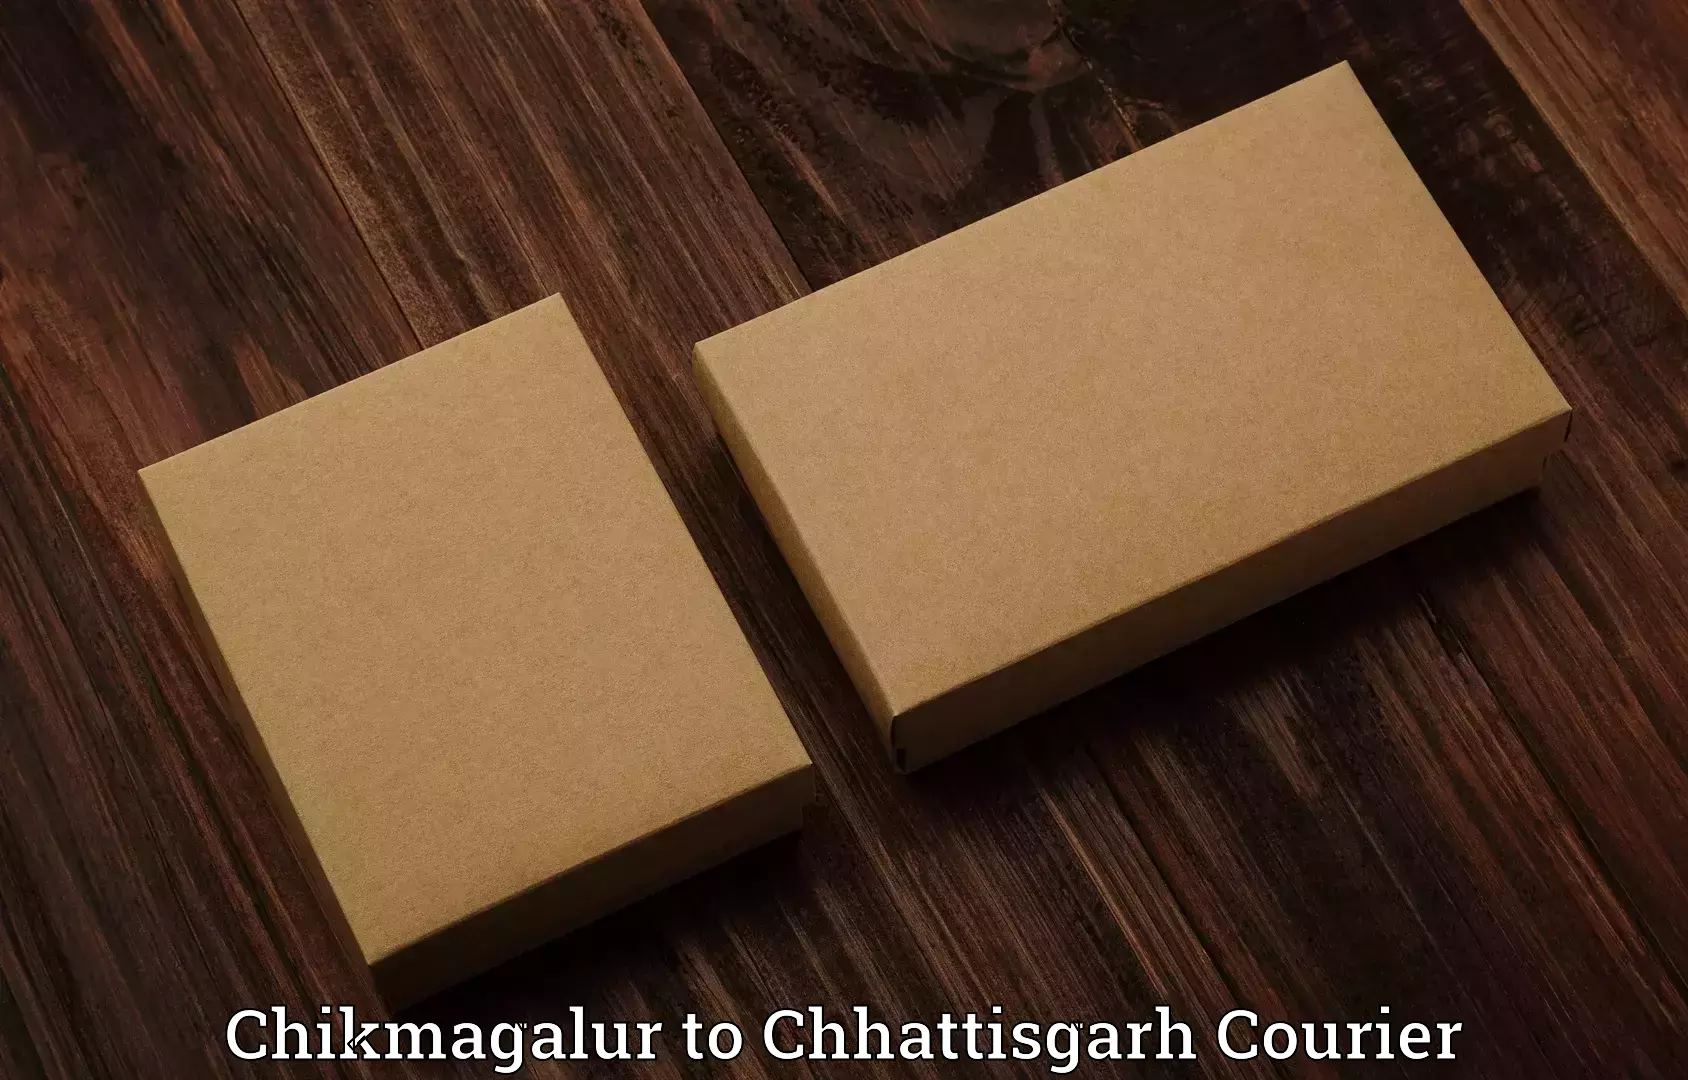 Baggage shipping service Chikmagalur to Dhamtari